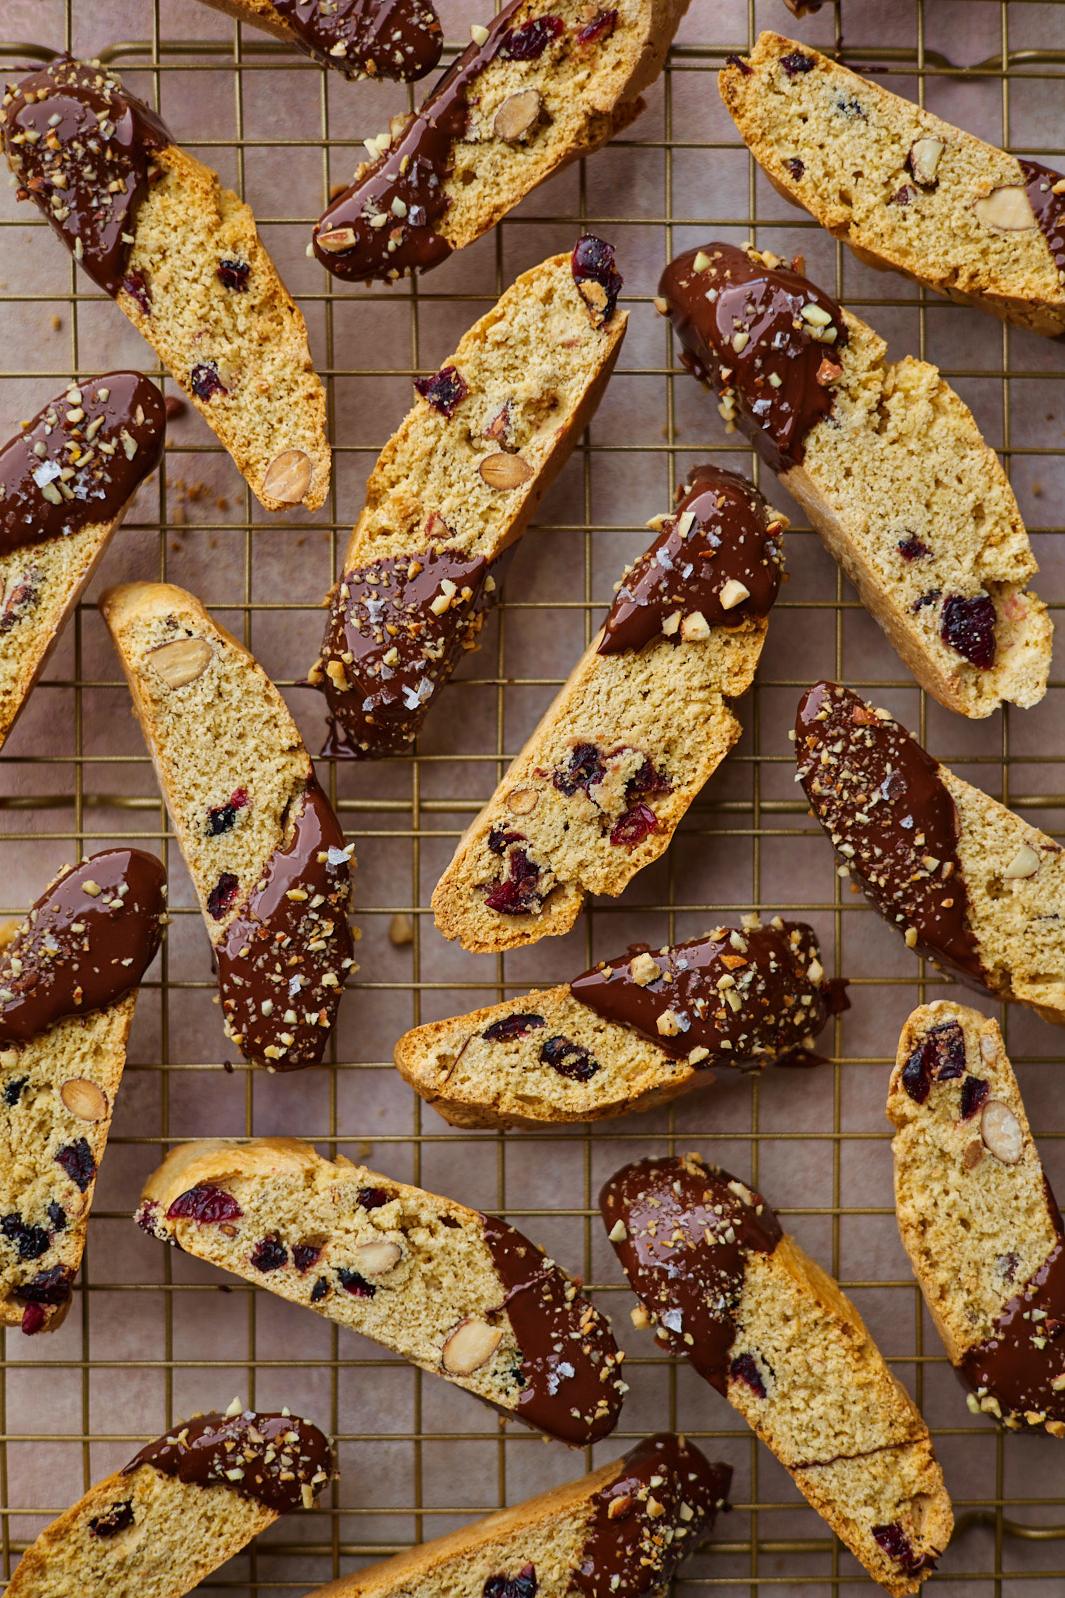  Cranberries and almonds make a heavenly match in this gluten-free recipe.